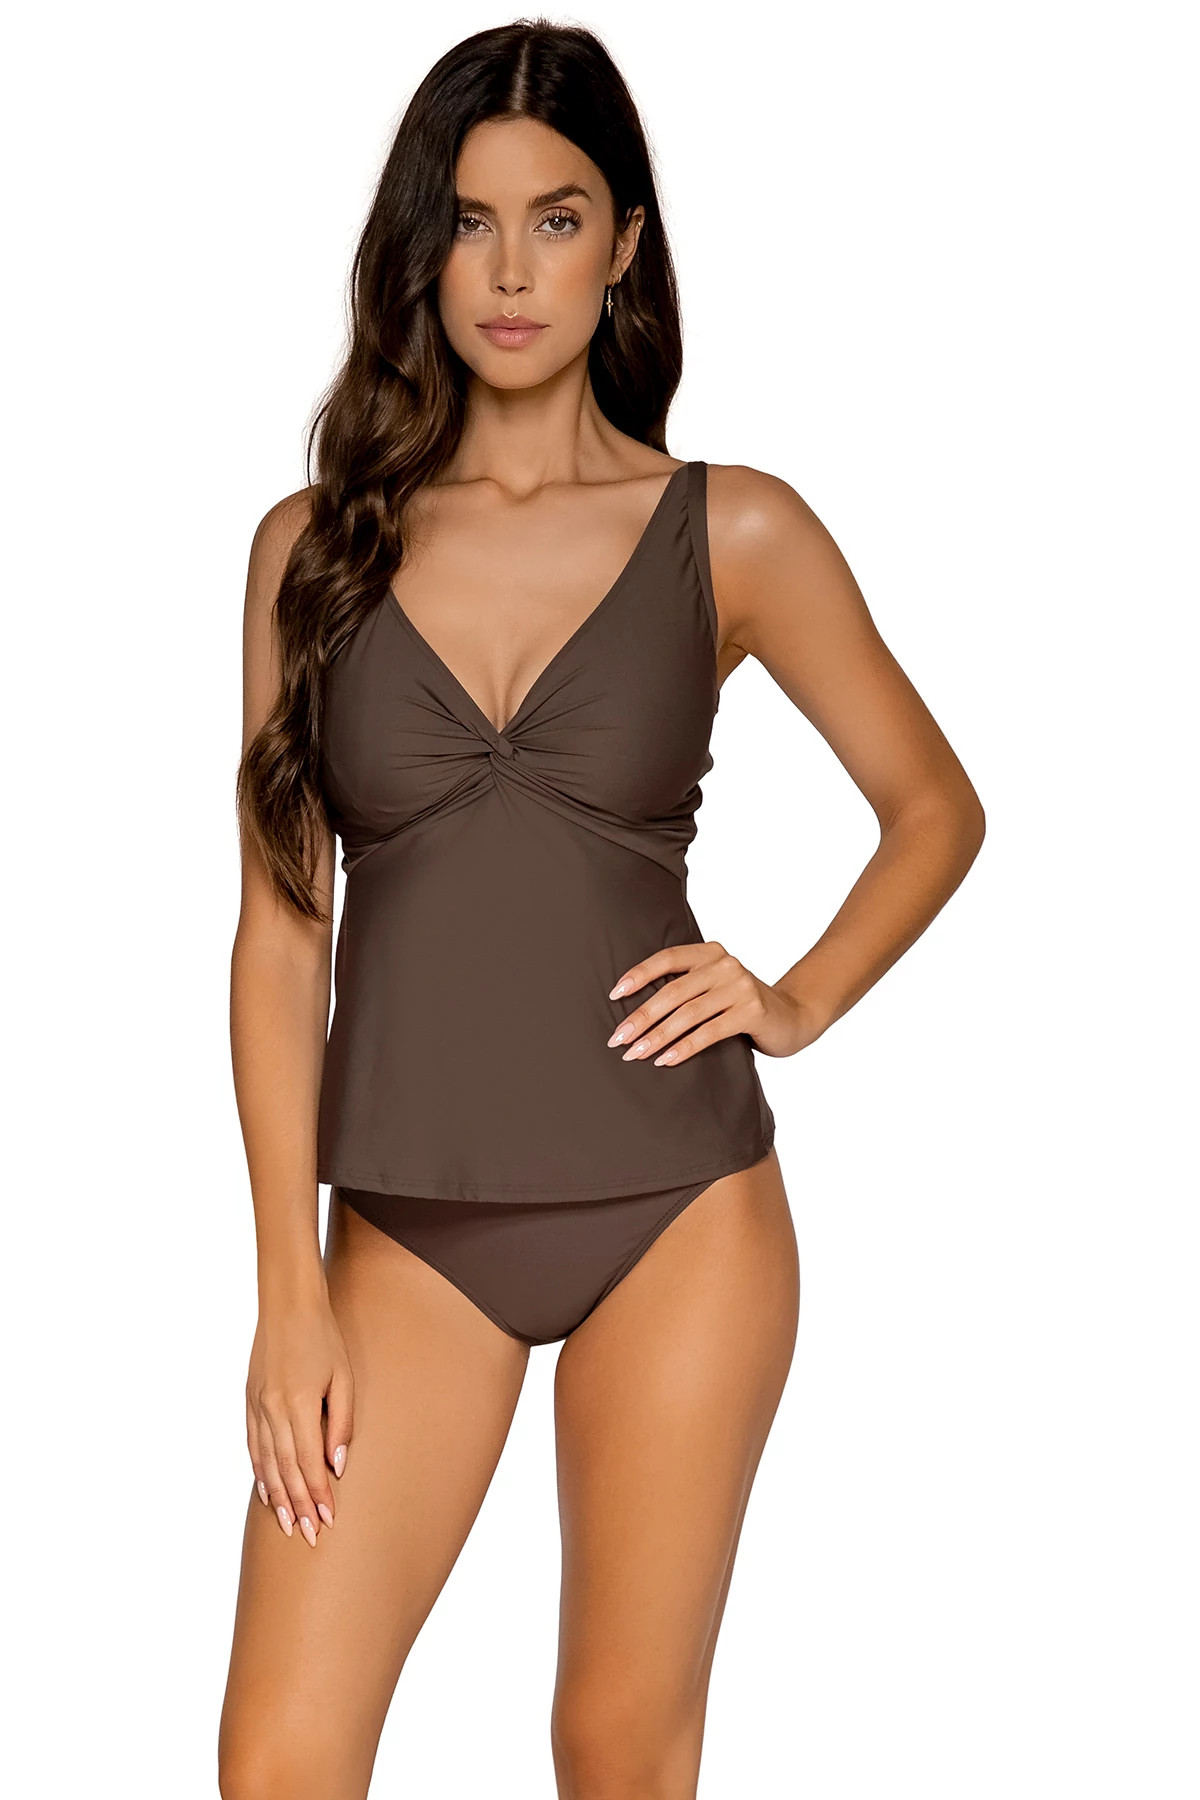 KONA Forever Underwire Bra Tankini Top (E-H Cup) image number 1